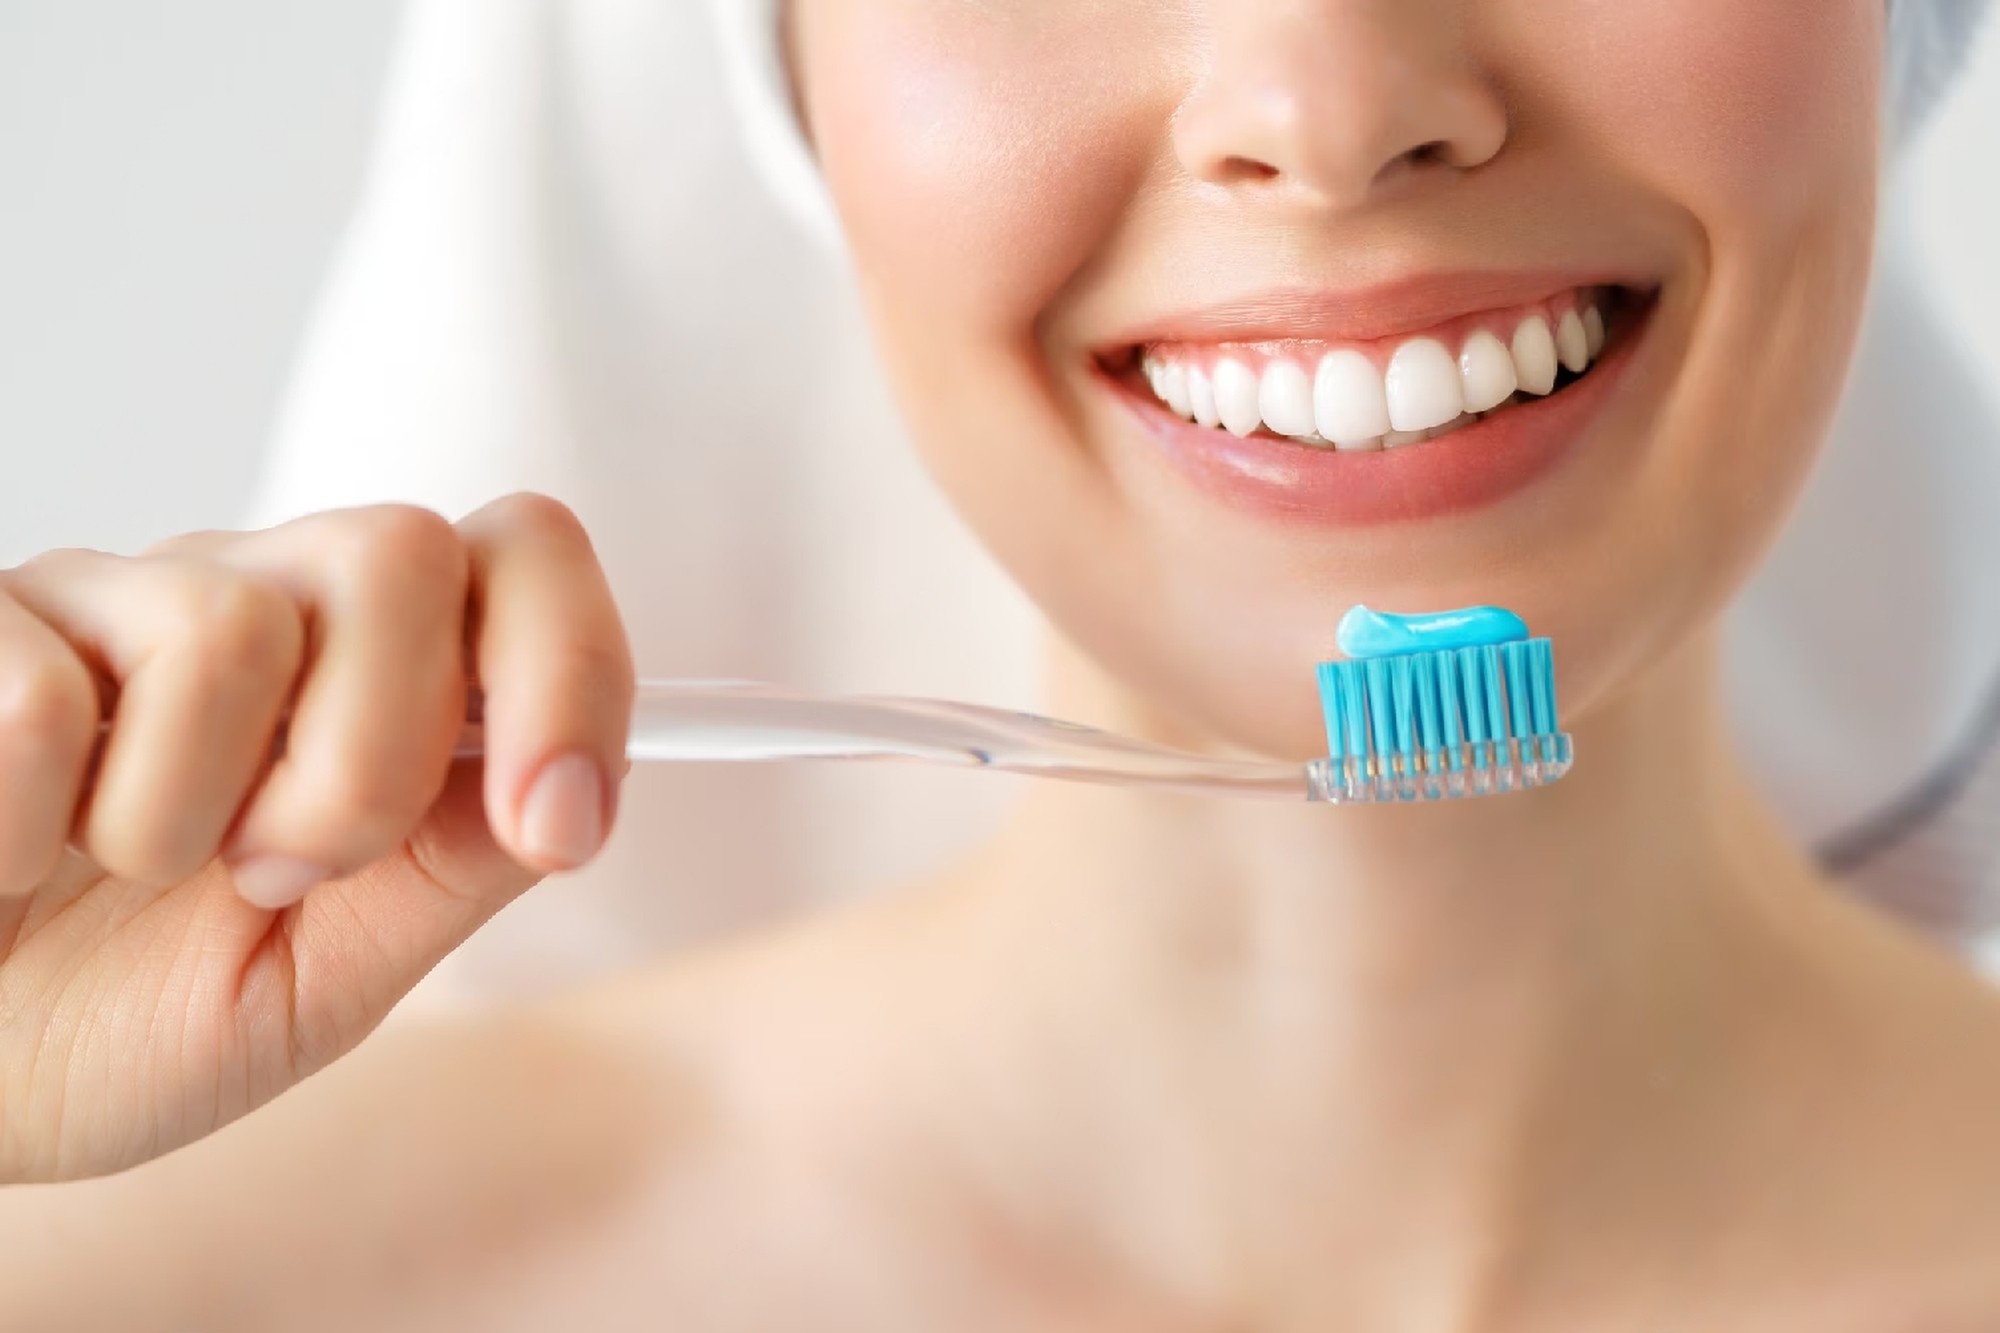 woman smiling holding toothbrush with Colgate toothpaste.